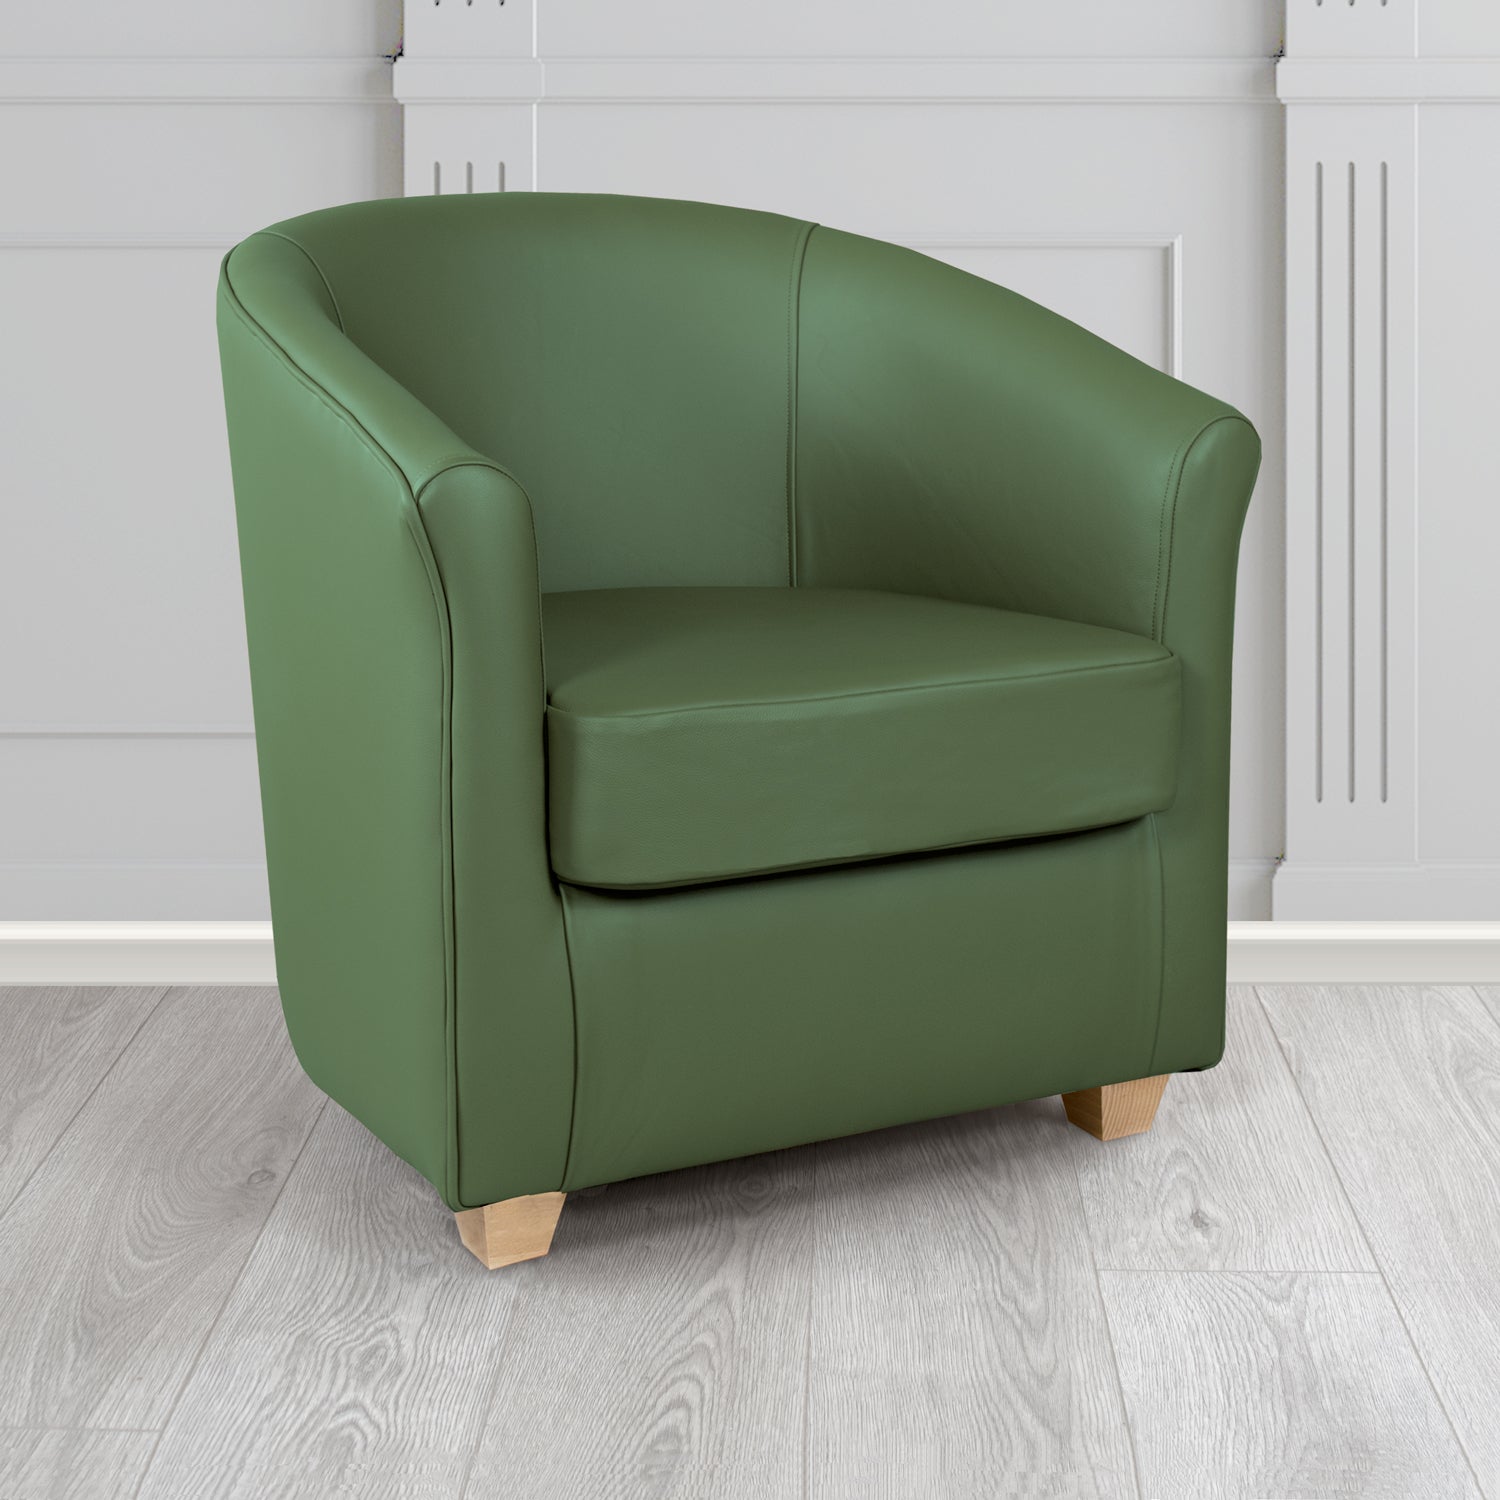 Cannes Shelly Forest Green Crib 5 Genuine Leather Tub Chair - The Tub Chair Shop